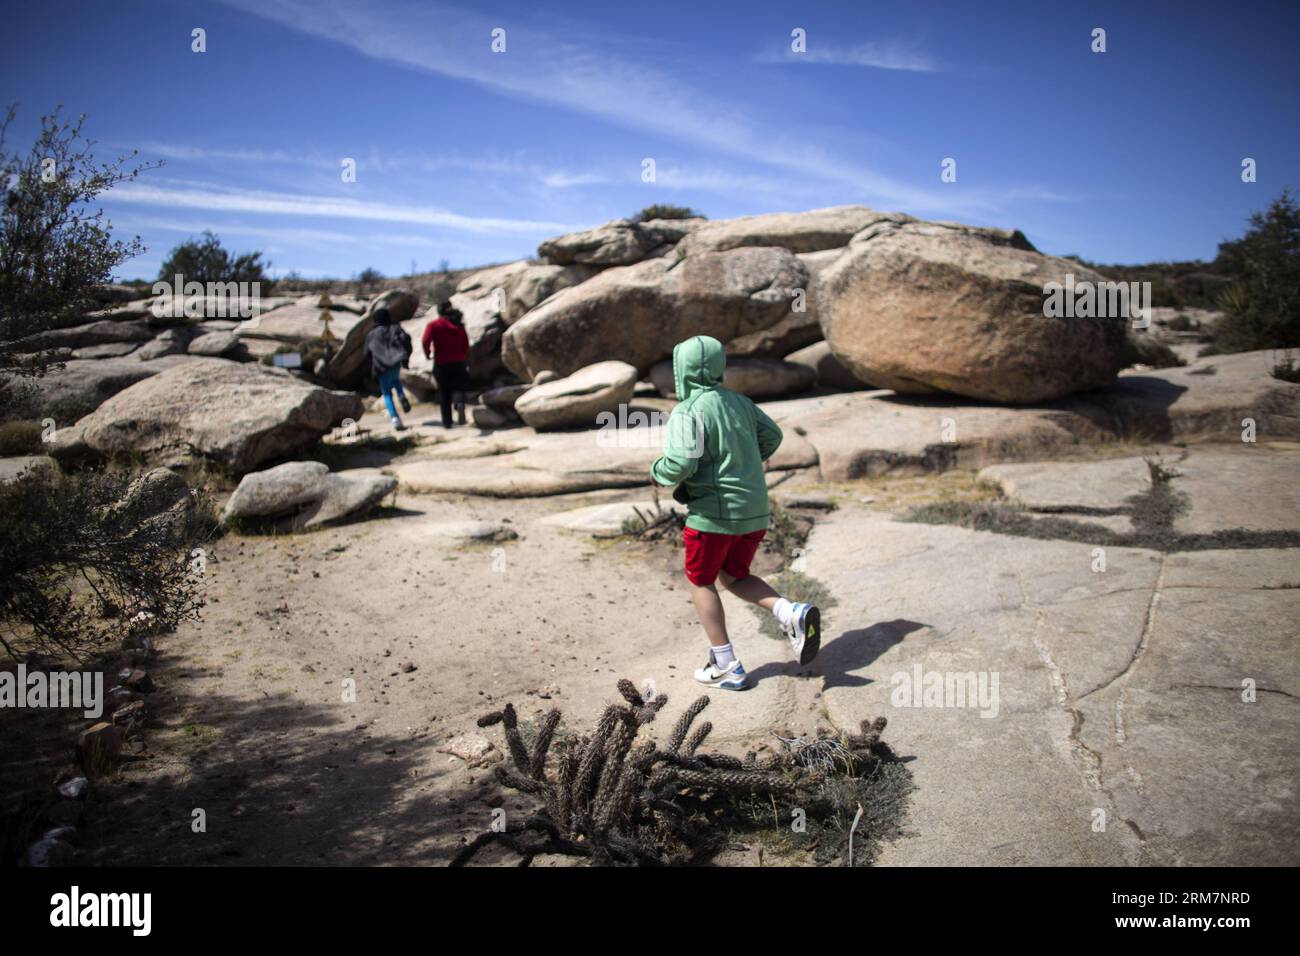 (140311) -- BAJA CALIFORNIA, (Xinhua) -- Image taken on March 9, 2014 shows tourists visiting the archaelogical site of El Vallecito near La Rumorosa town Baja California, northwest of Mexico. According to the National Institute of Antropology and History (INAH, its acronym in Spanish), El Vallecito was occupied by members of the Yuman linguistic family, which originally lived in the northwest area of the state of Baja California and southern California. At the site there are rock paintings of simple lines traced with mineral dyes in white, red, black and yellow. (Xinhua/Guillermo Arias) MEXIC Stock Photo